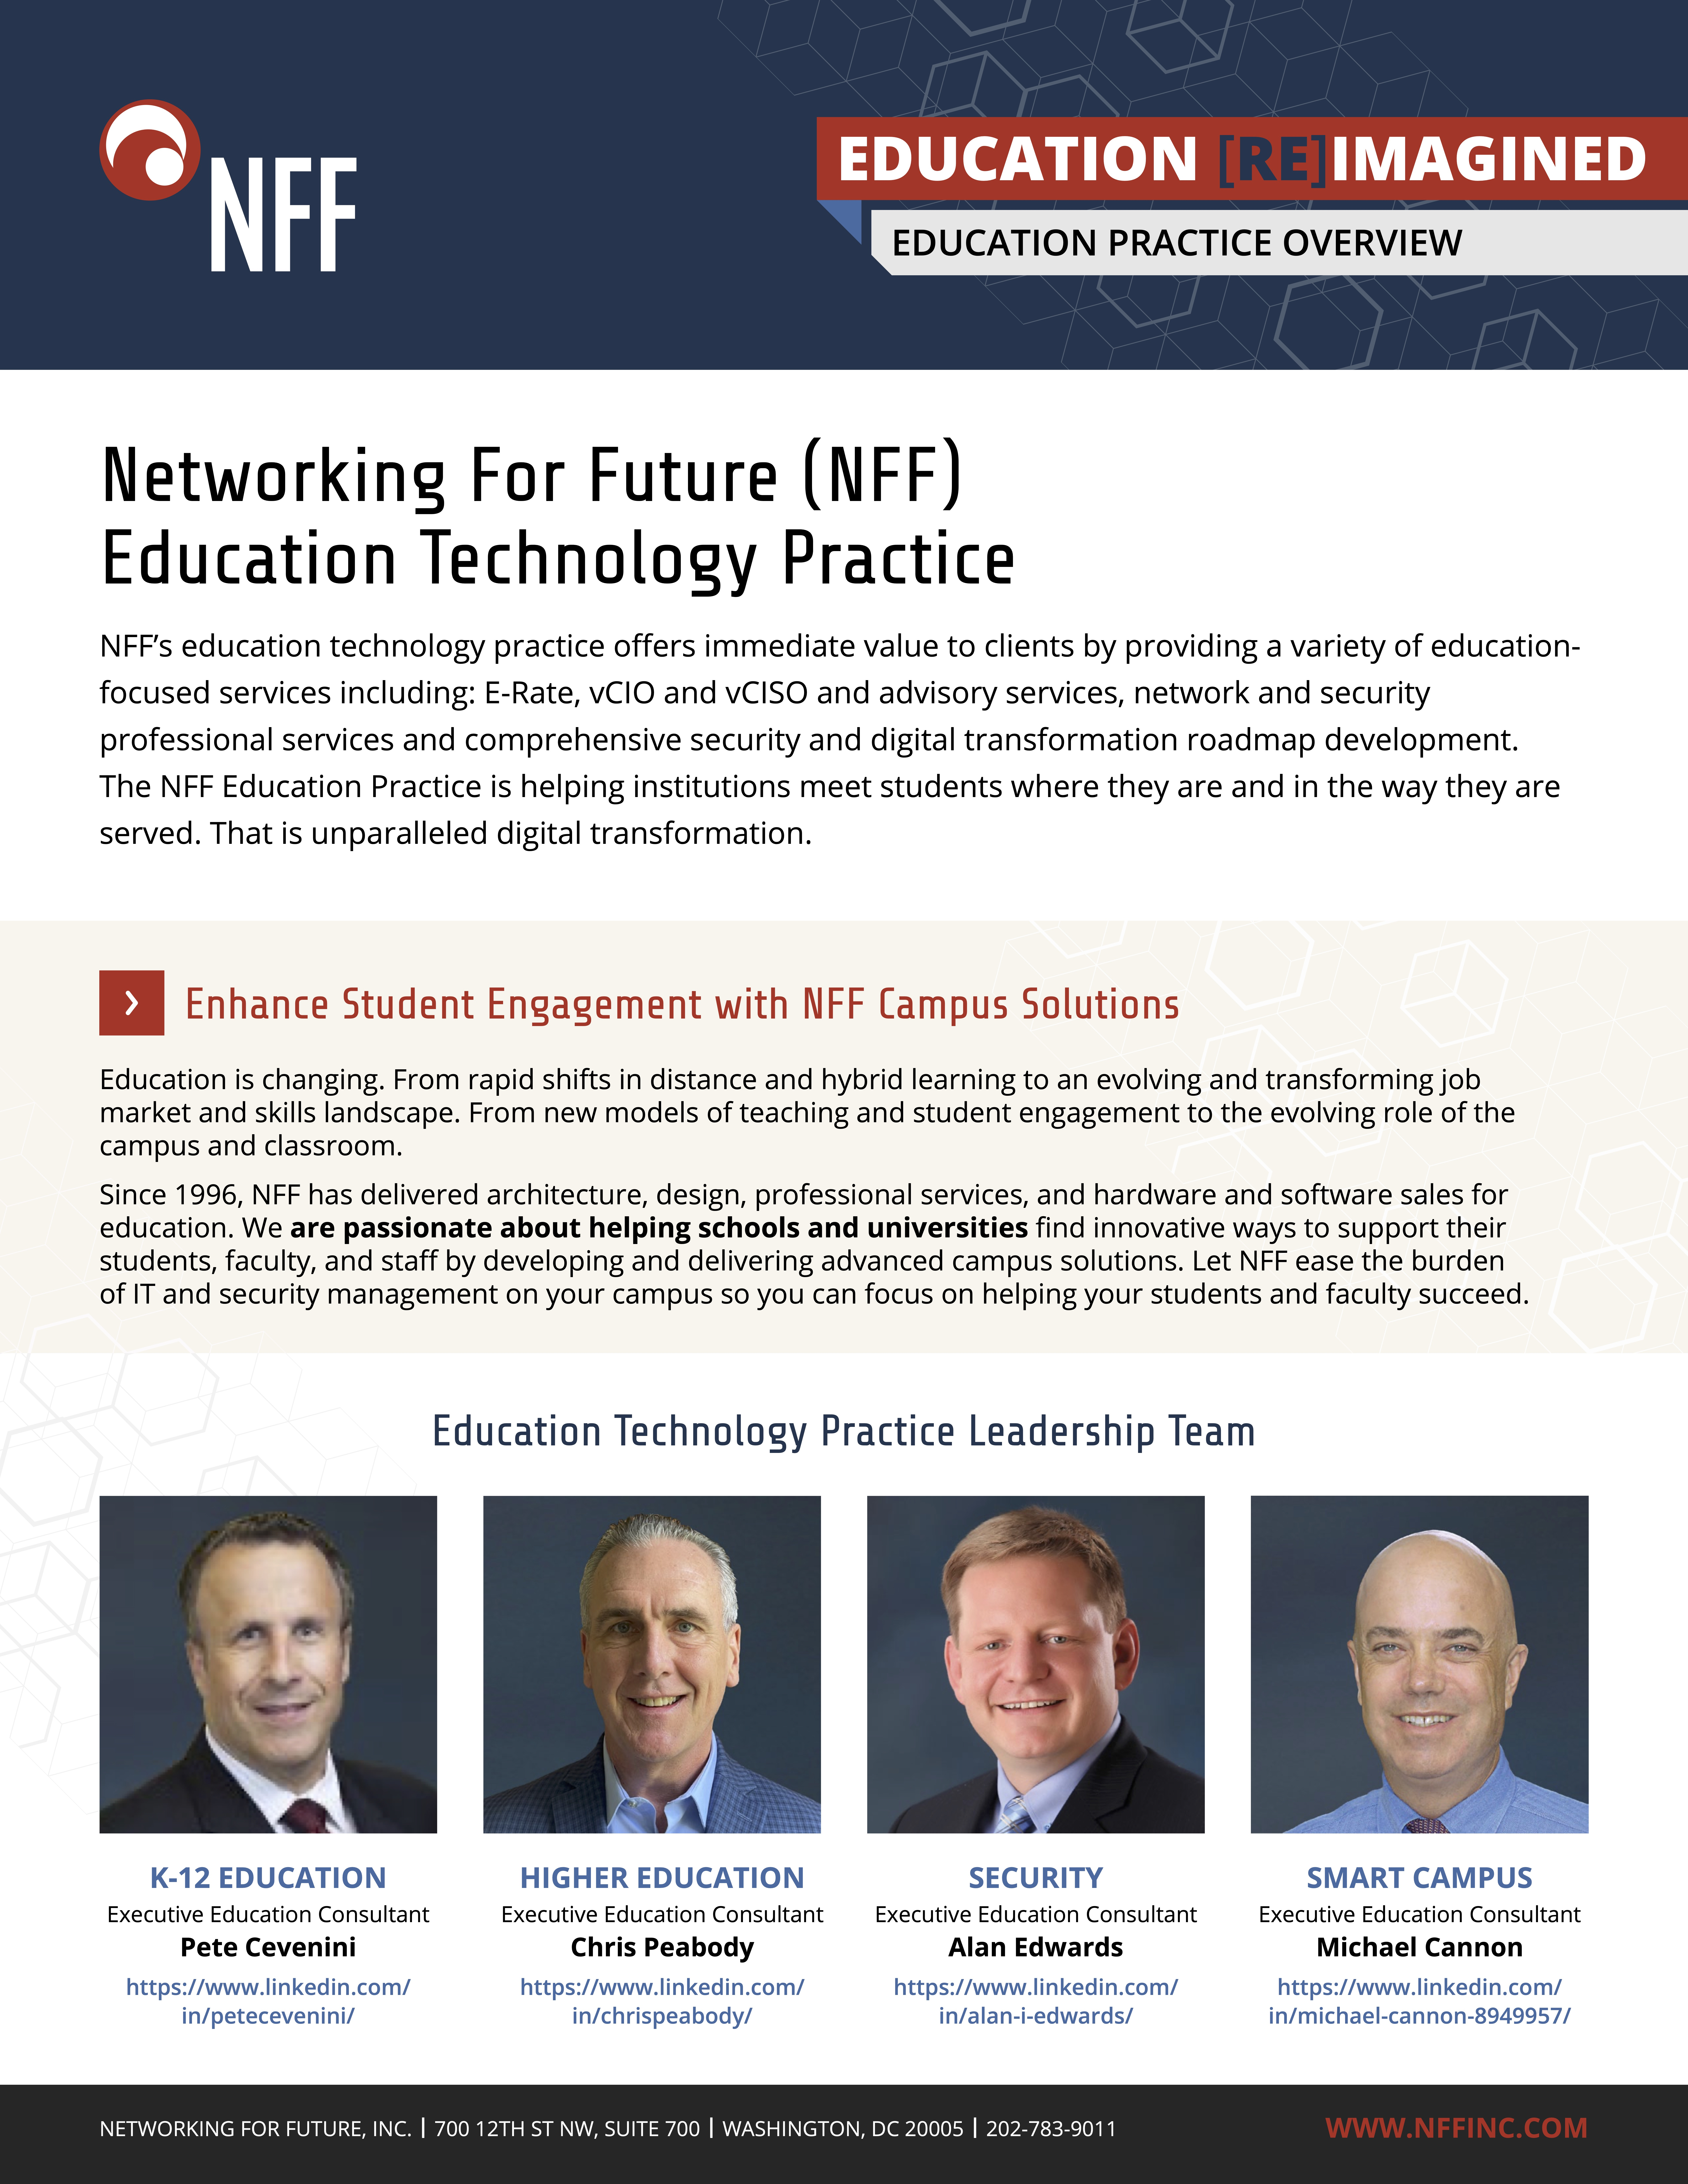 NFF Education Practice Featured Image